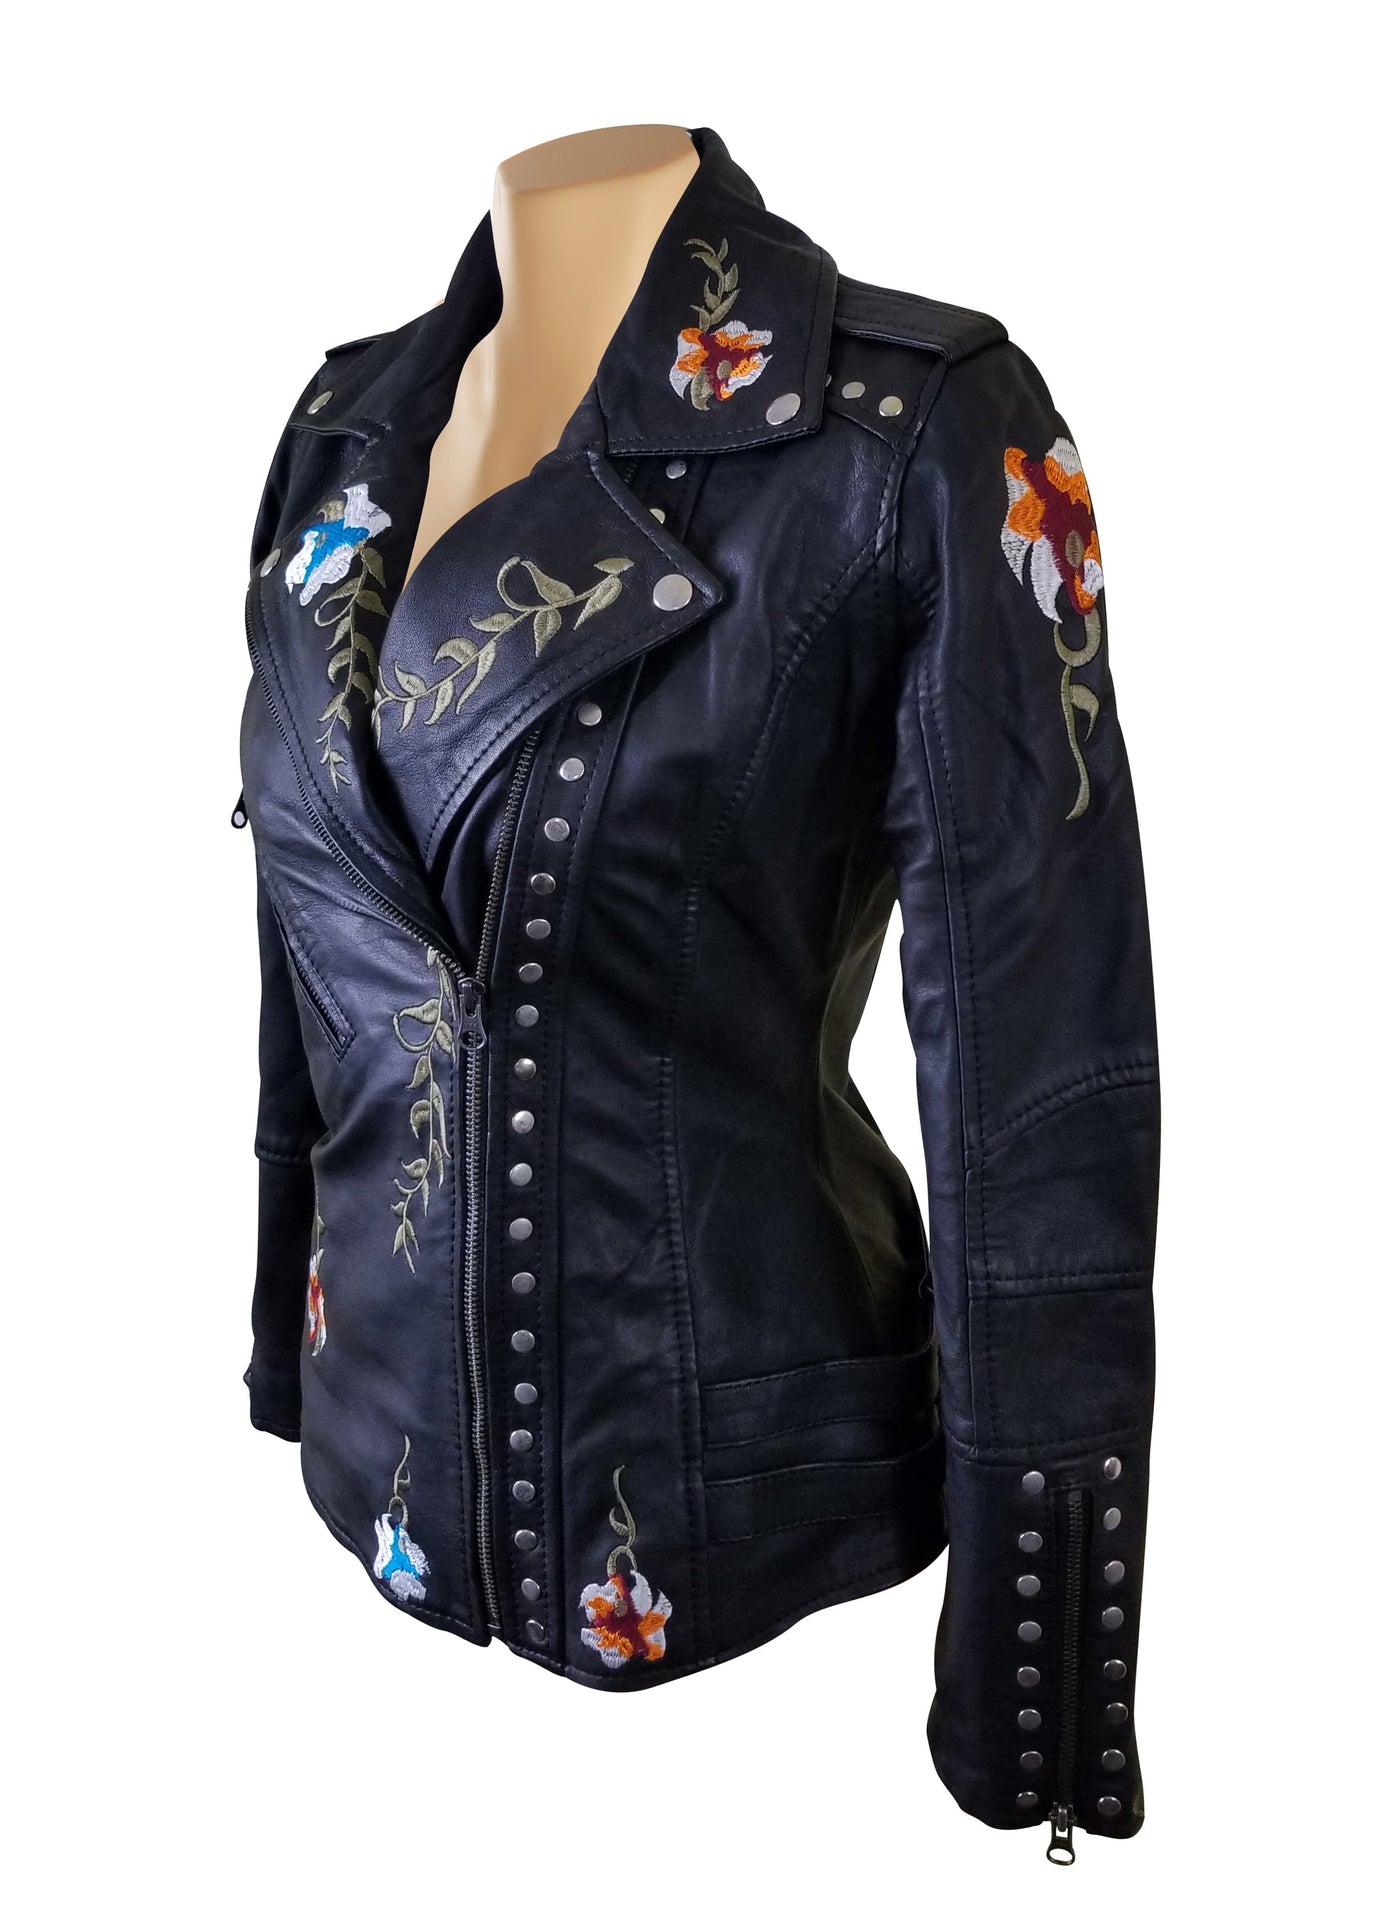 Flowery Embroidered Leather Jacket With Studs